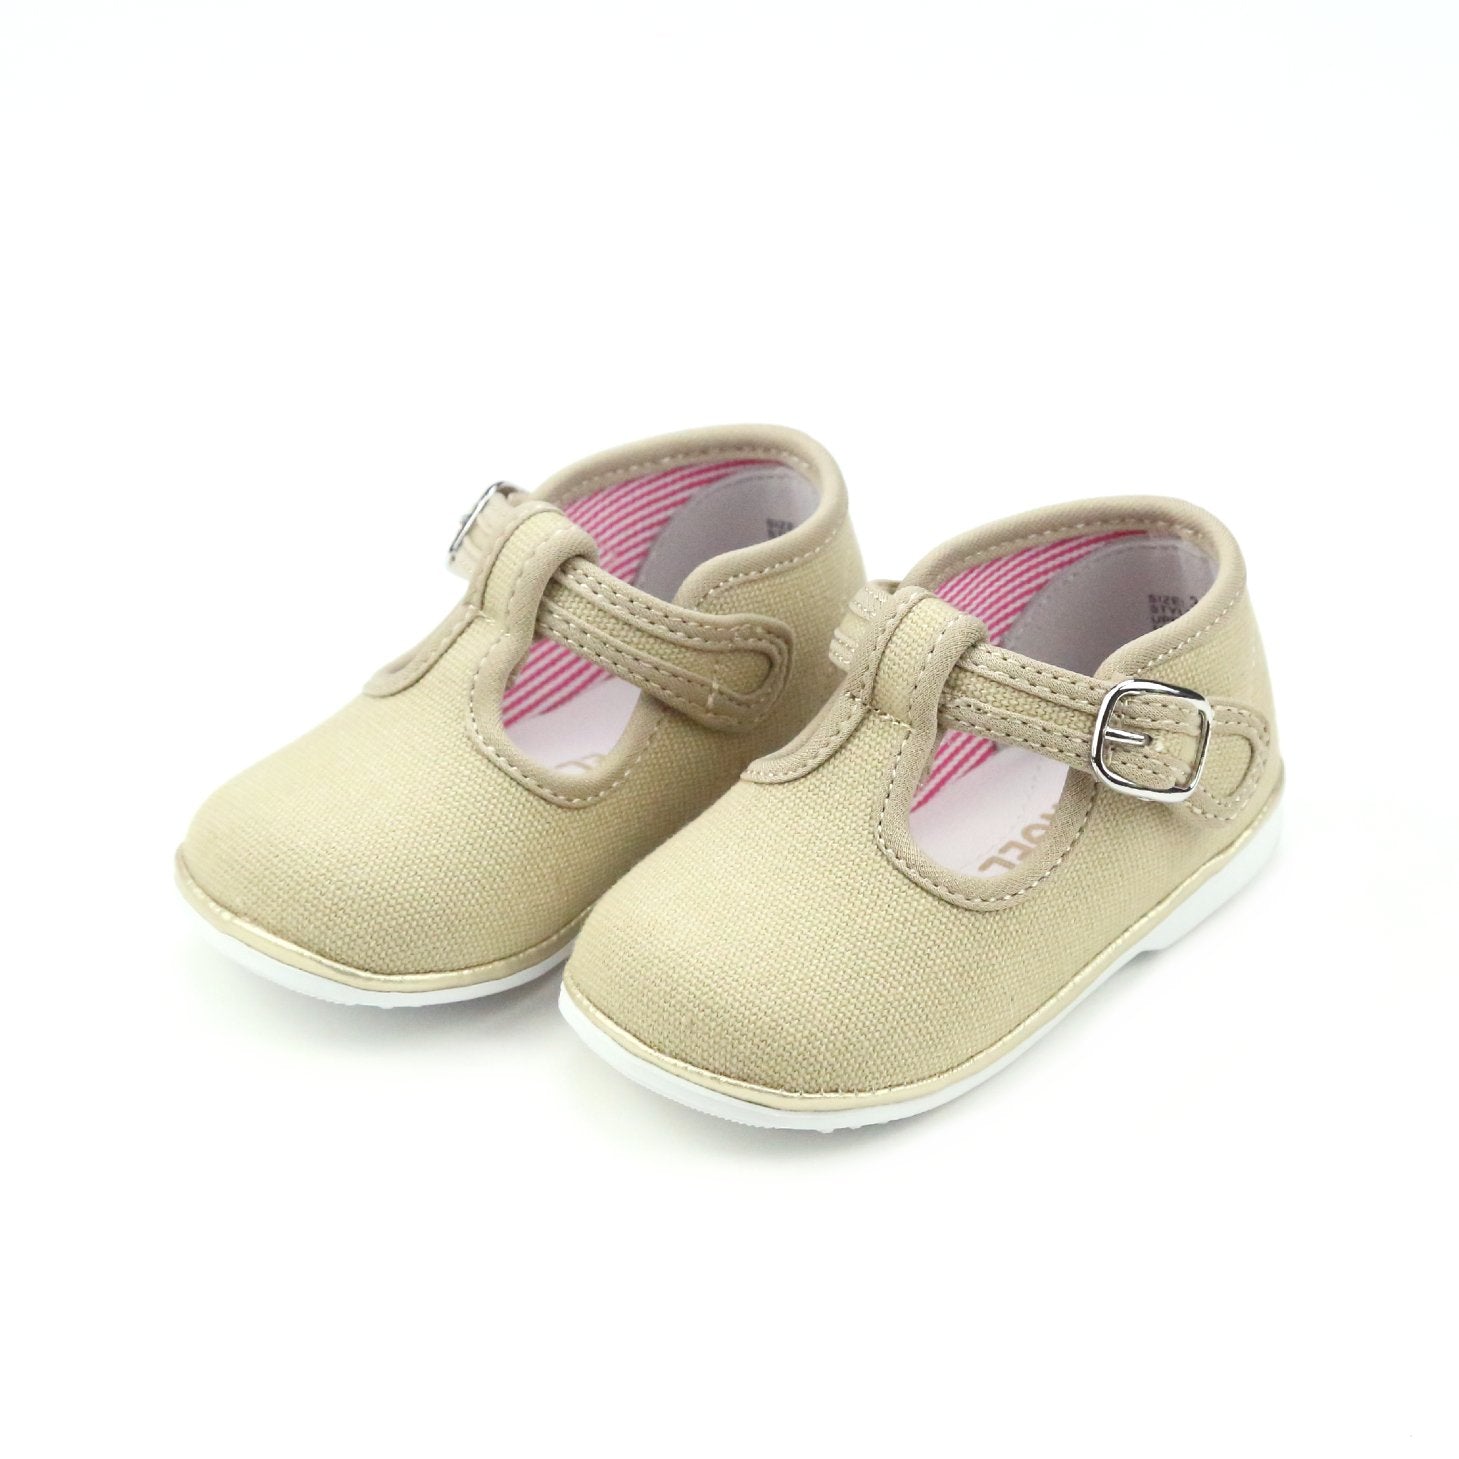 Poppy Canvas T-Strap Mary Jane - Babies & Toddlers